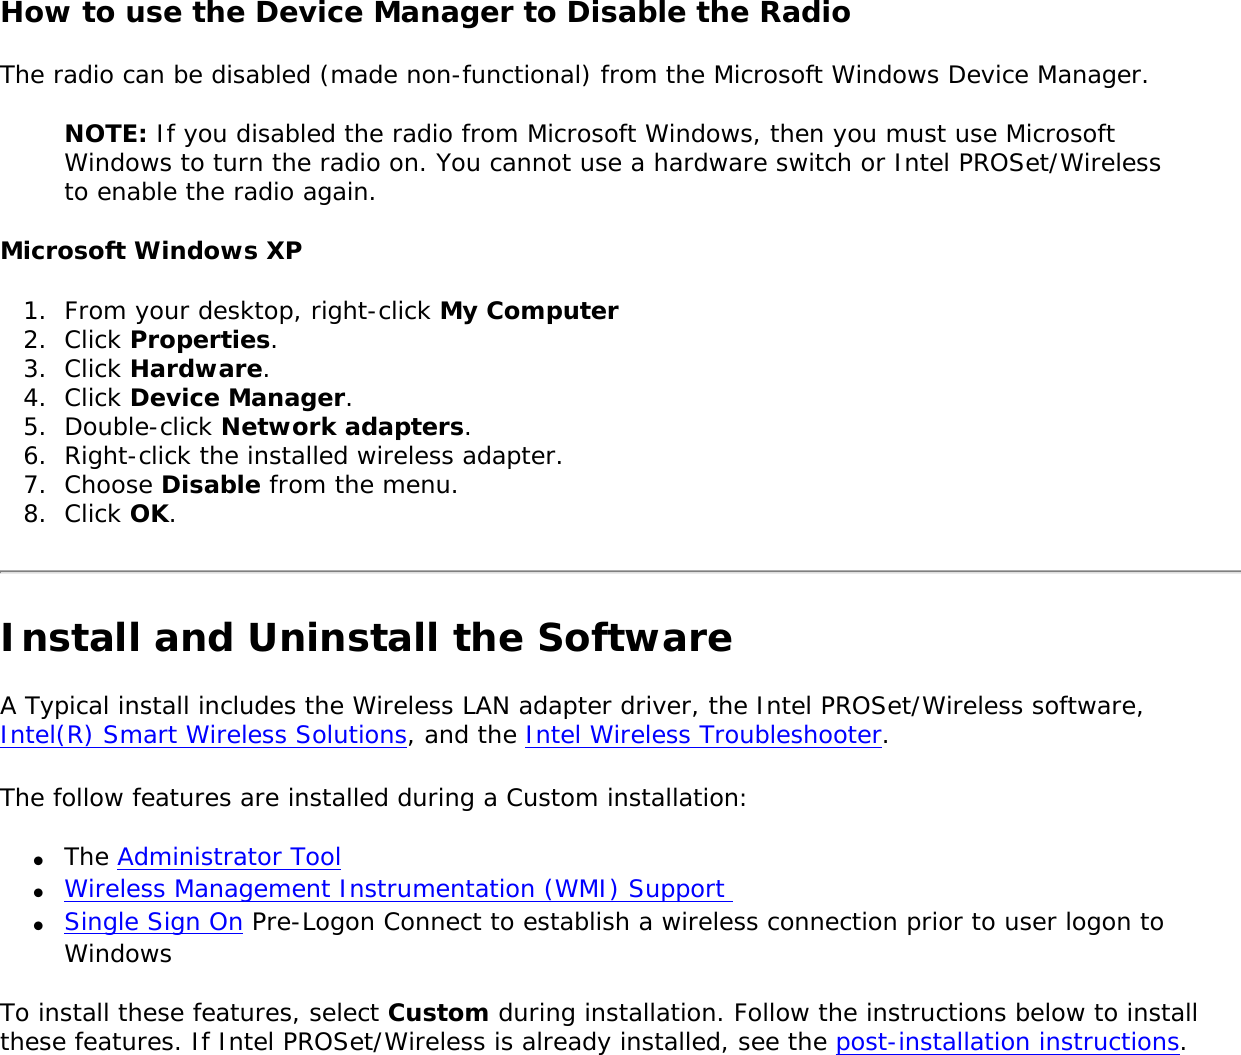 How to use the Device Manager to Disable the Radio The radio can be disabled (made non-functional) from the Microsoft Windows Device Manager. NOTE: If you disabled the radio from Microsoft Windows, then you must use Microsoft Windows to turn the radio on. You cannot use a hardware switch or Intel PROSet/Wireless to enable the radio again. Microsoft Windows XP1.  From your desktop, right-click My Computer2.  Click Properties. 3.  Click Hardware. 4.  Click Device Manager. 5.  Double-click Network adapters.6.  Right-click the installed wireless adapter.7.  Choose Disable from the menu.8.  Click OK.Install and Uninstall the SoftwareA Typical install includes the Wireless LAN adapter driver, the Intel PROSet/Wireless software, Intel(R) Smart Wireless Solutions, and the Intel Wireless Troubleshooter. The follow features are installed during a Custom installation: ●     The Administrator Tool●     Wireless Management Instrumentation (WMI) Support ●     Single Sign On Pre-Logon Connect to establish a wireless connection prior to user logon to WindowsTo install these features, select Custom during installation. Follow the instructions below to install these features. If Intel PROSet/Wireless is already installed, see the post-installation instructions. 